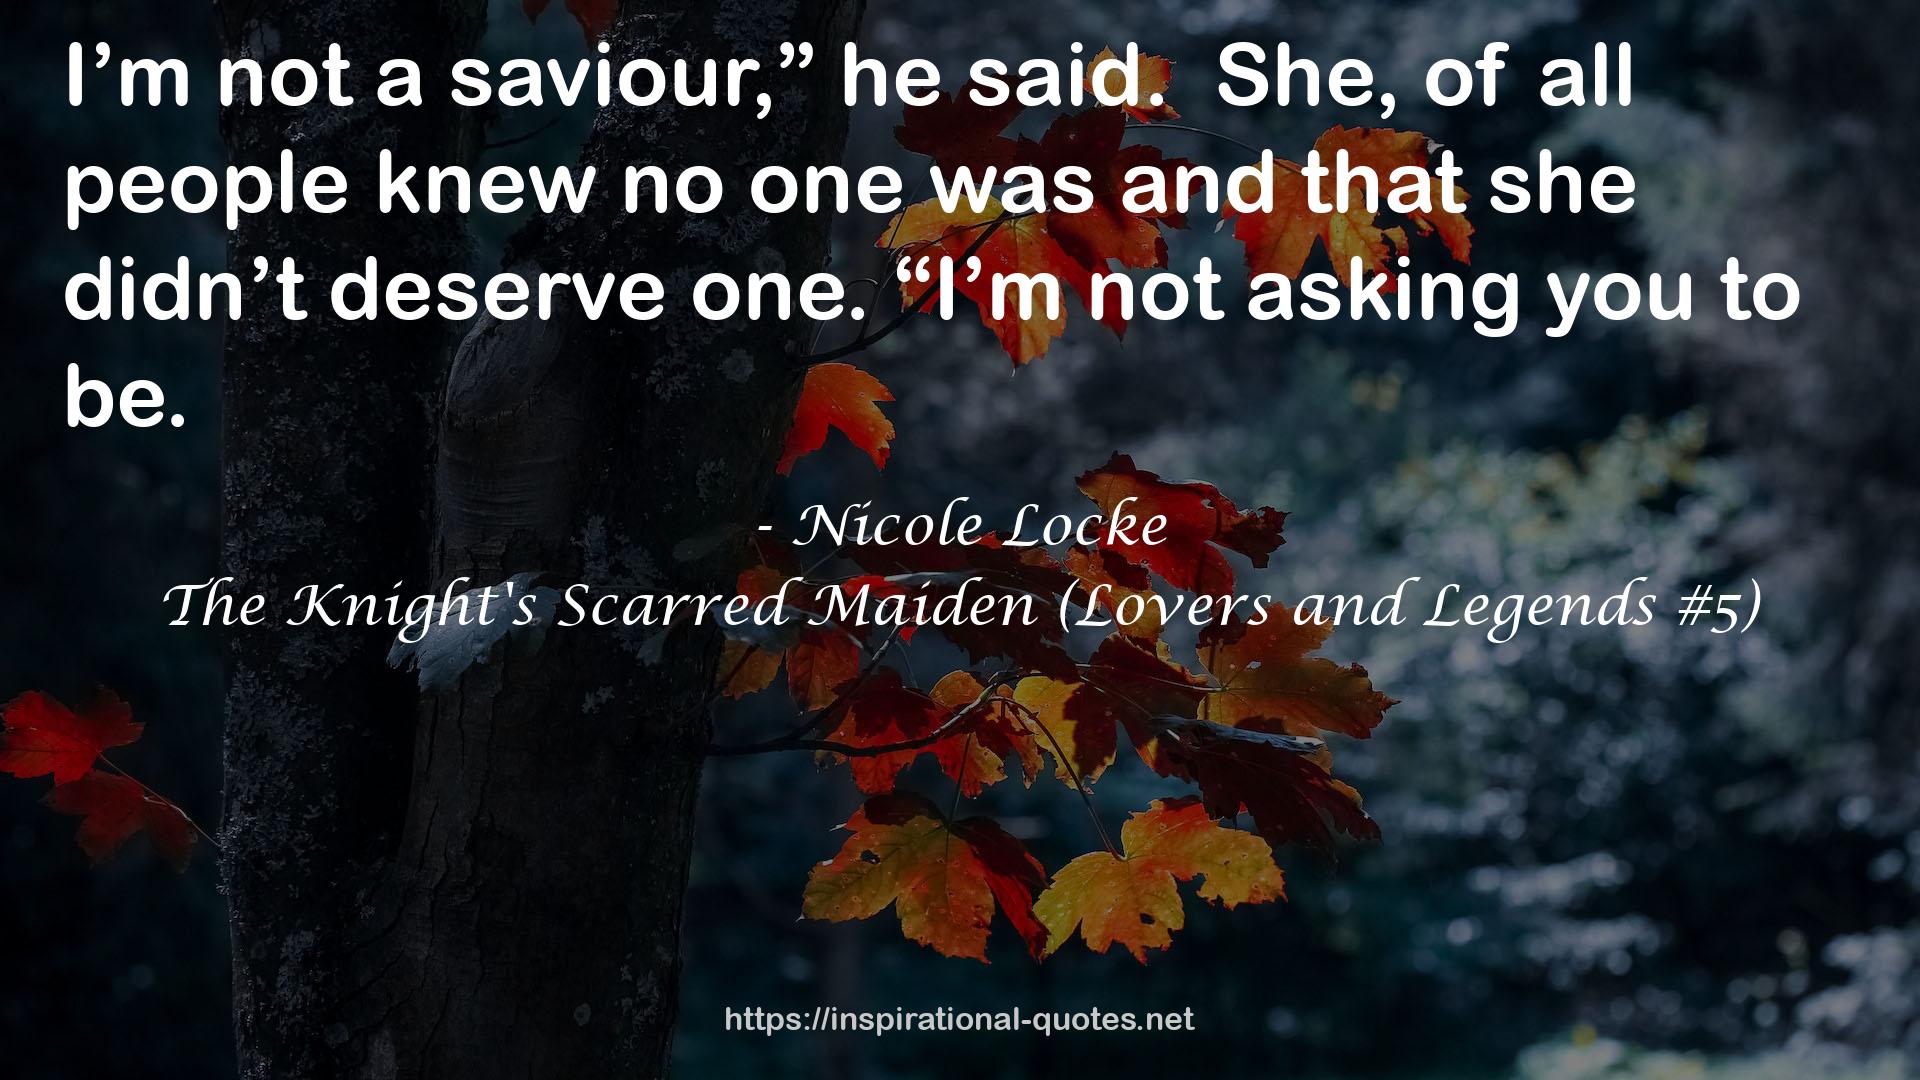 The Knight's Scarred Maiden (Lovers and Legends #5) QUOTES